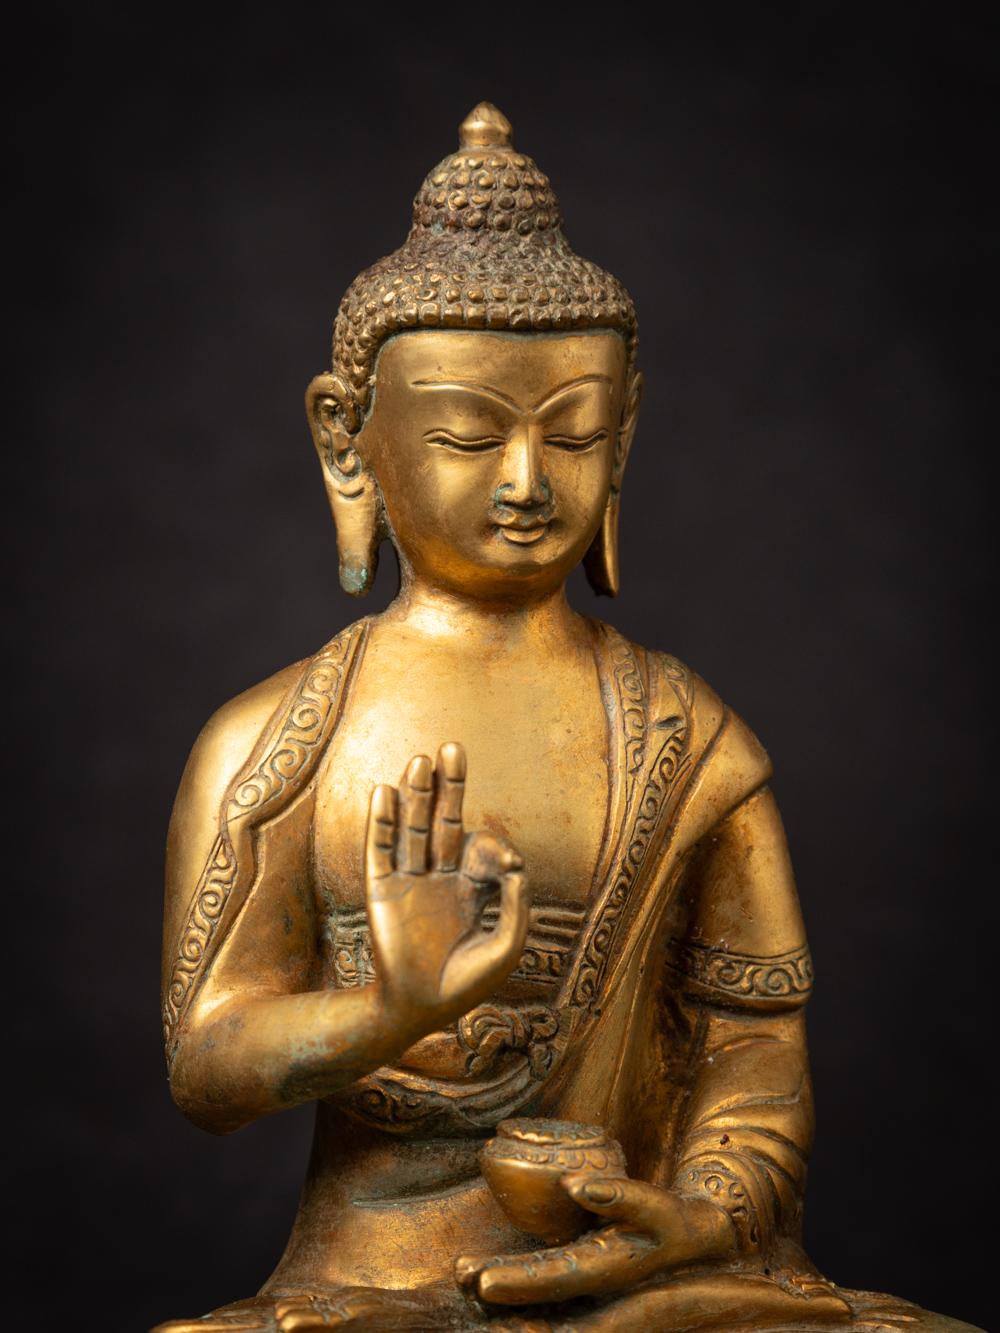 The old bronze Nepali Buddha statue is a captivating and spiritually meaningful artifact originating from Nepal. Crafted from bronze and adorned with fire gilding in 24-karat gold, this statue stands at 21.5 cm in height and measures 17.5 cm in